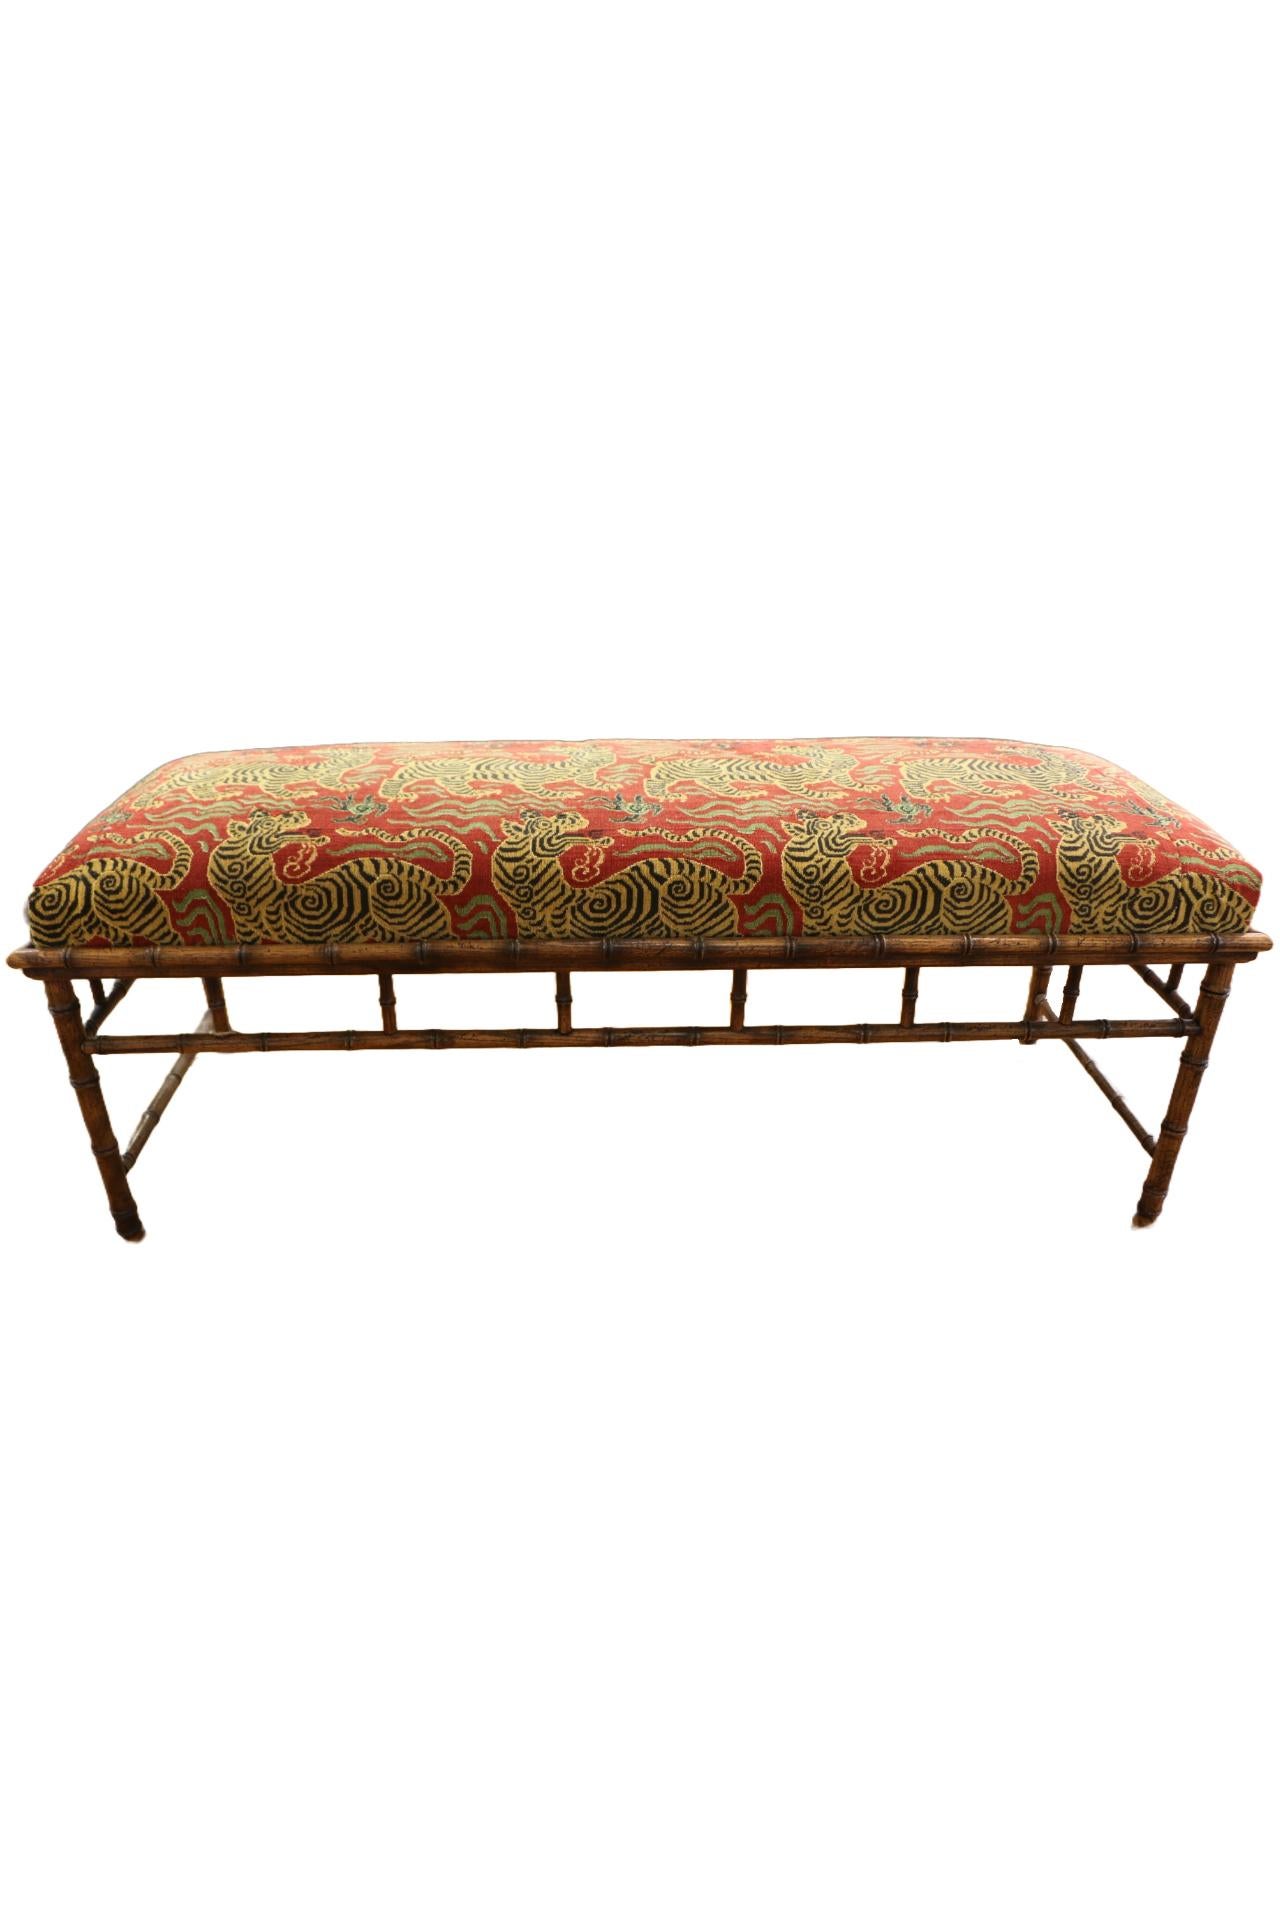 Late 20th Century 1970s Faux Bamboo Wood Bench